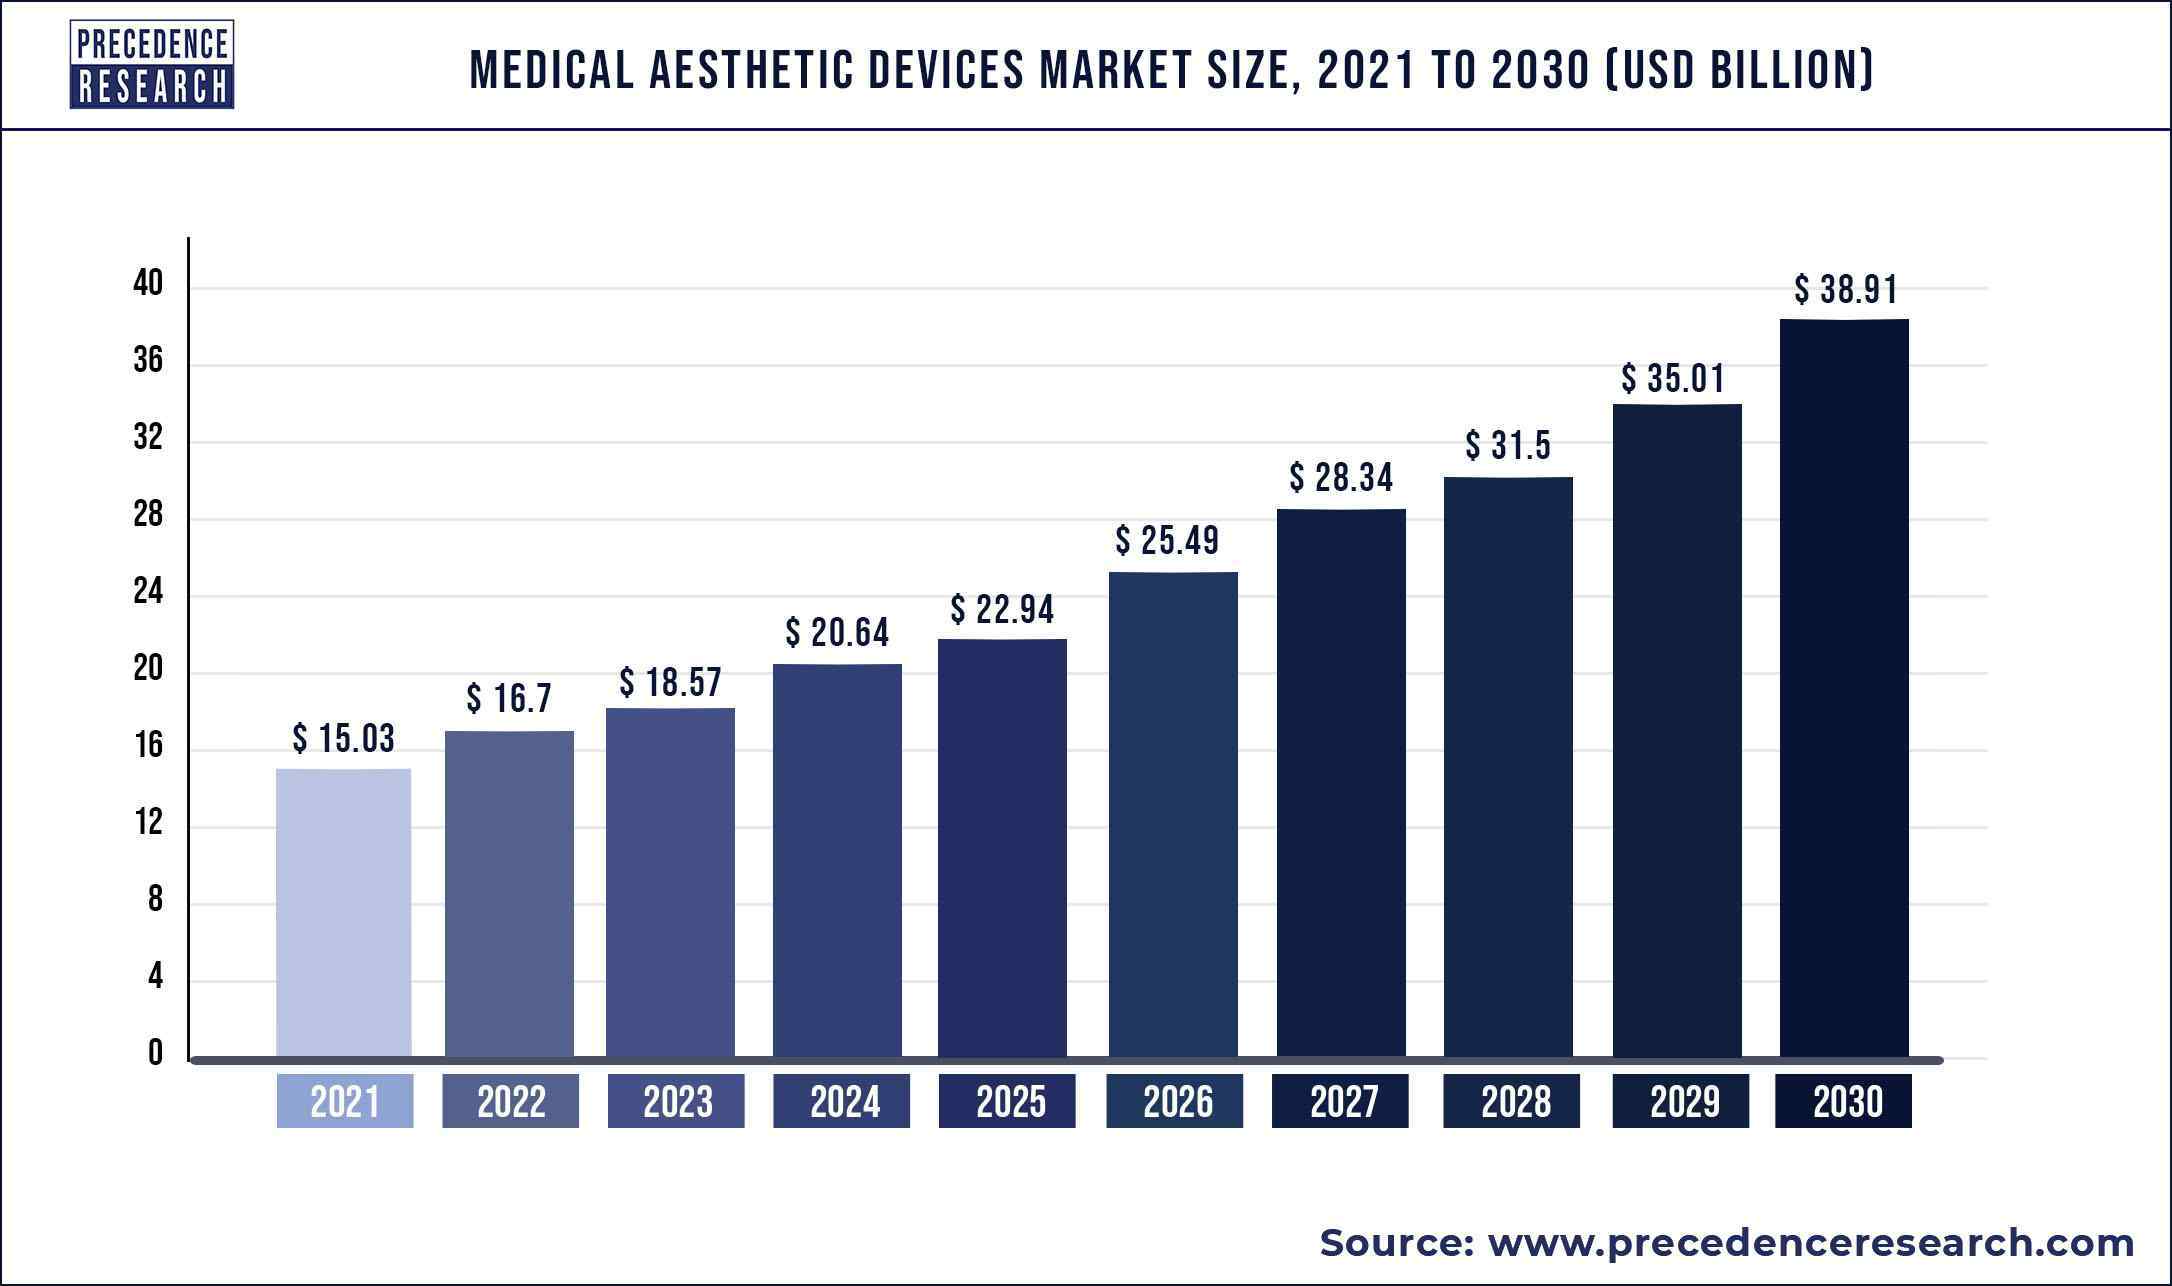 Medical Aesthetic Devices Market Size 2022 to 2030